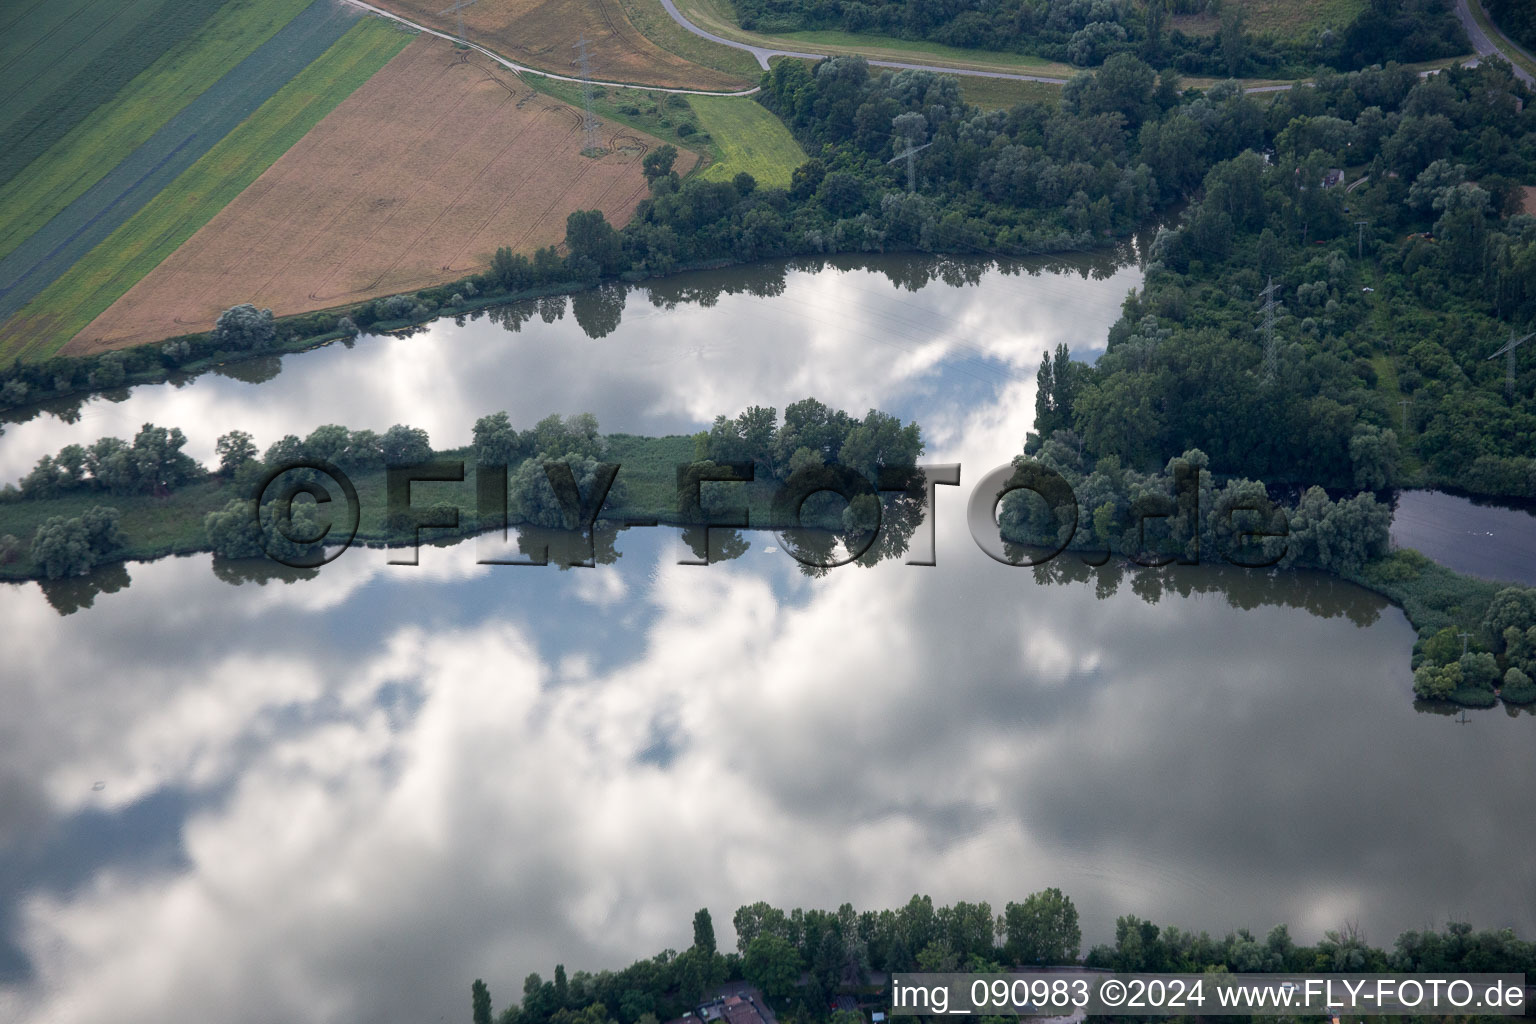 Bird's eye view of Blue Adriatic in Altrip in the state Rhineland-Palatinate, Germany